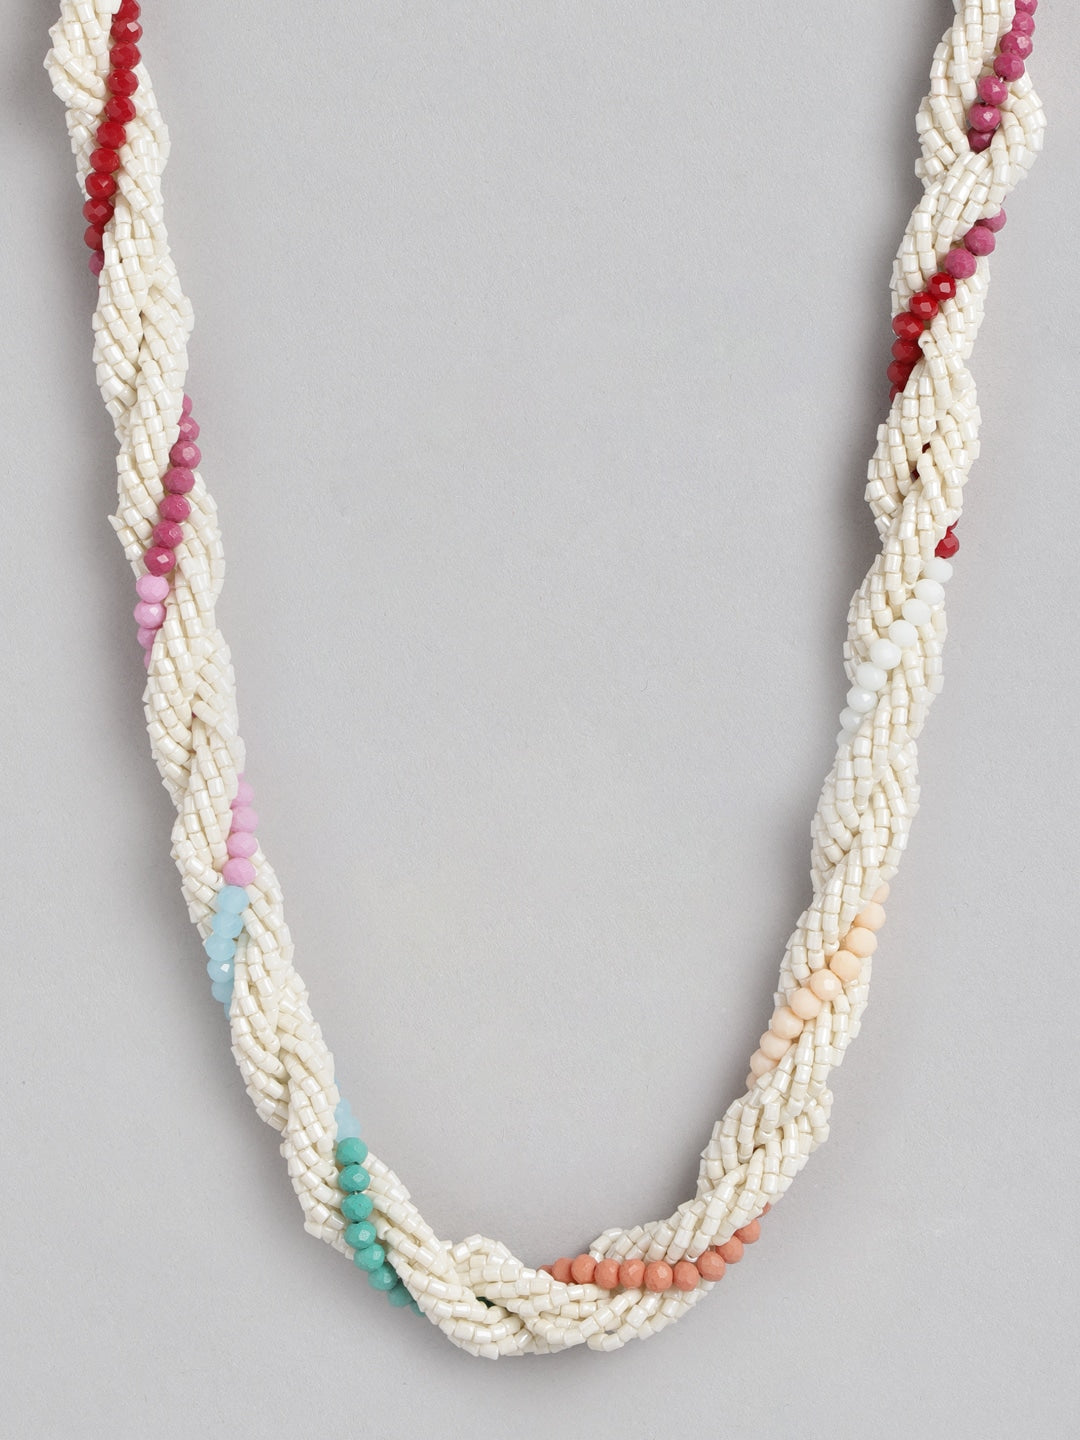 RICHEERA White & Red Layered Beaded Necklace